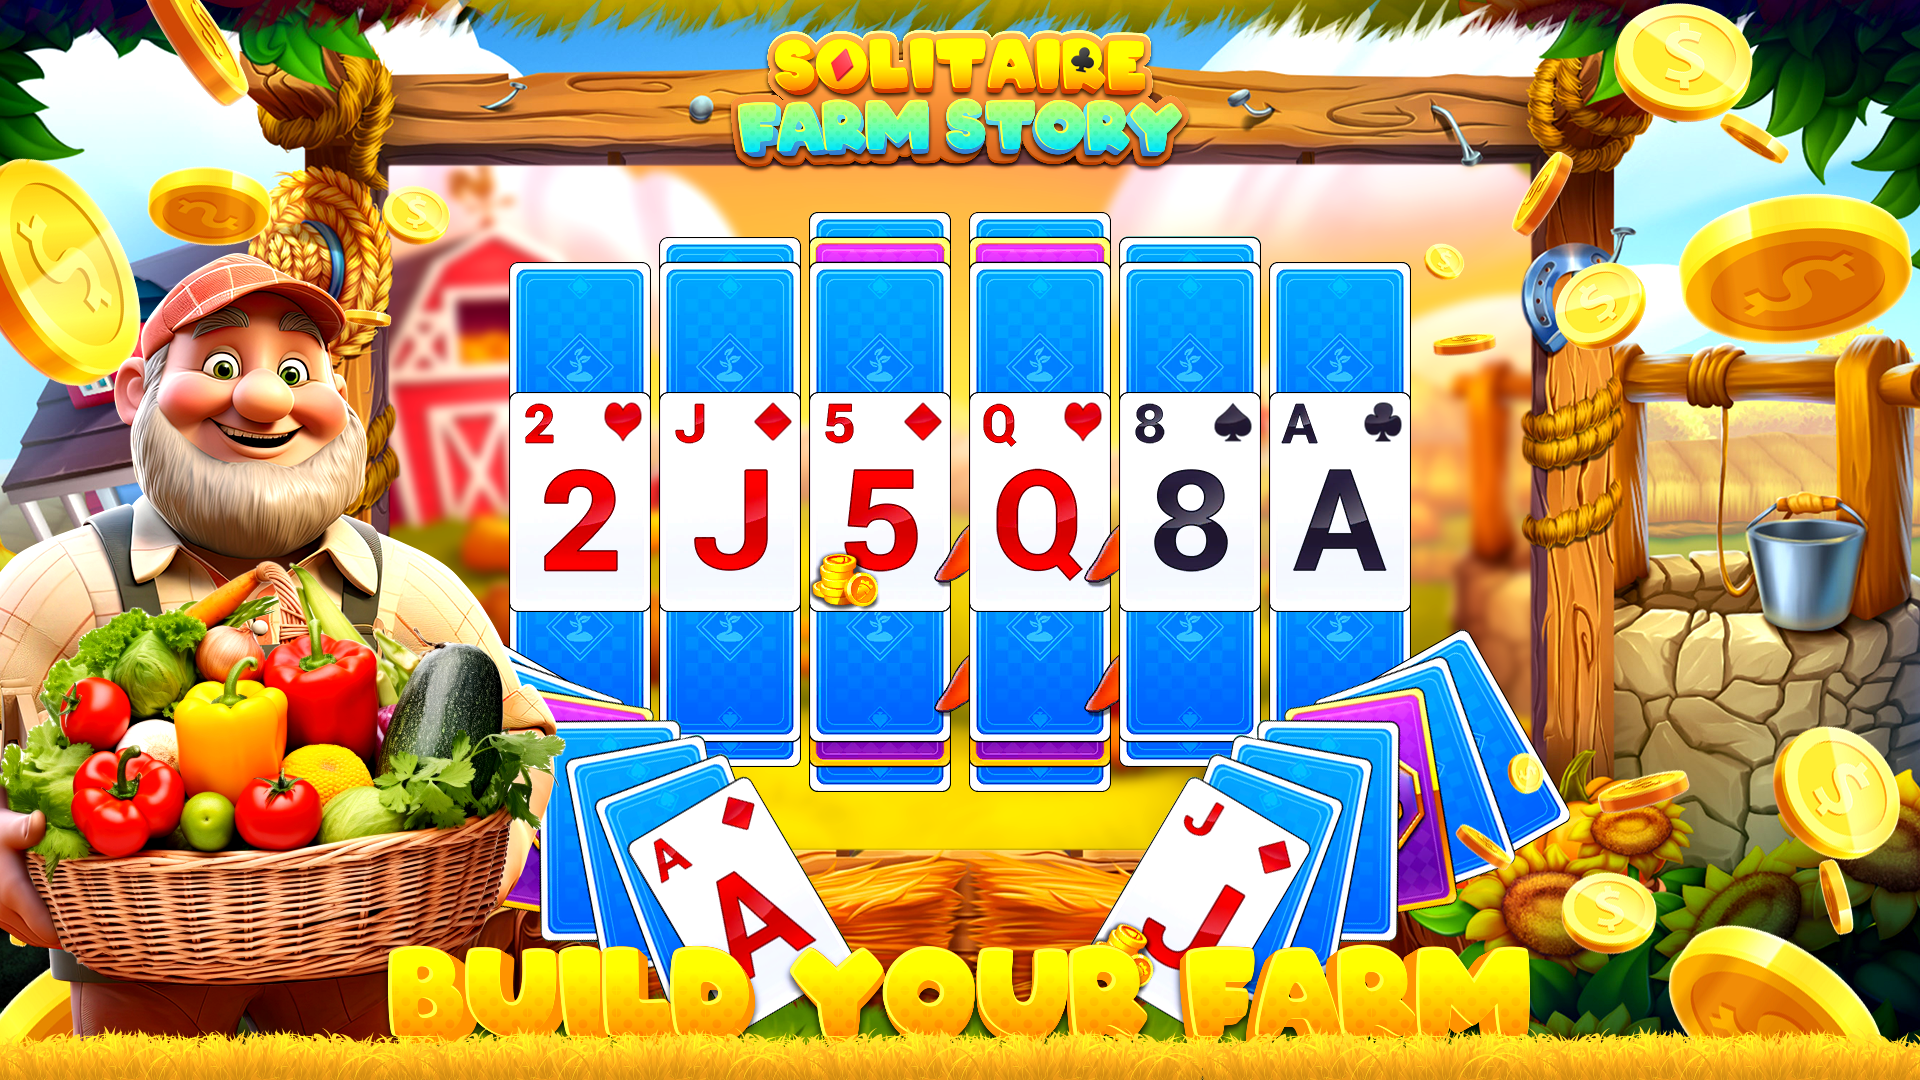 Screenshot 1 of Solitaire Card Game Farm Story 1.0